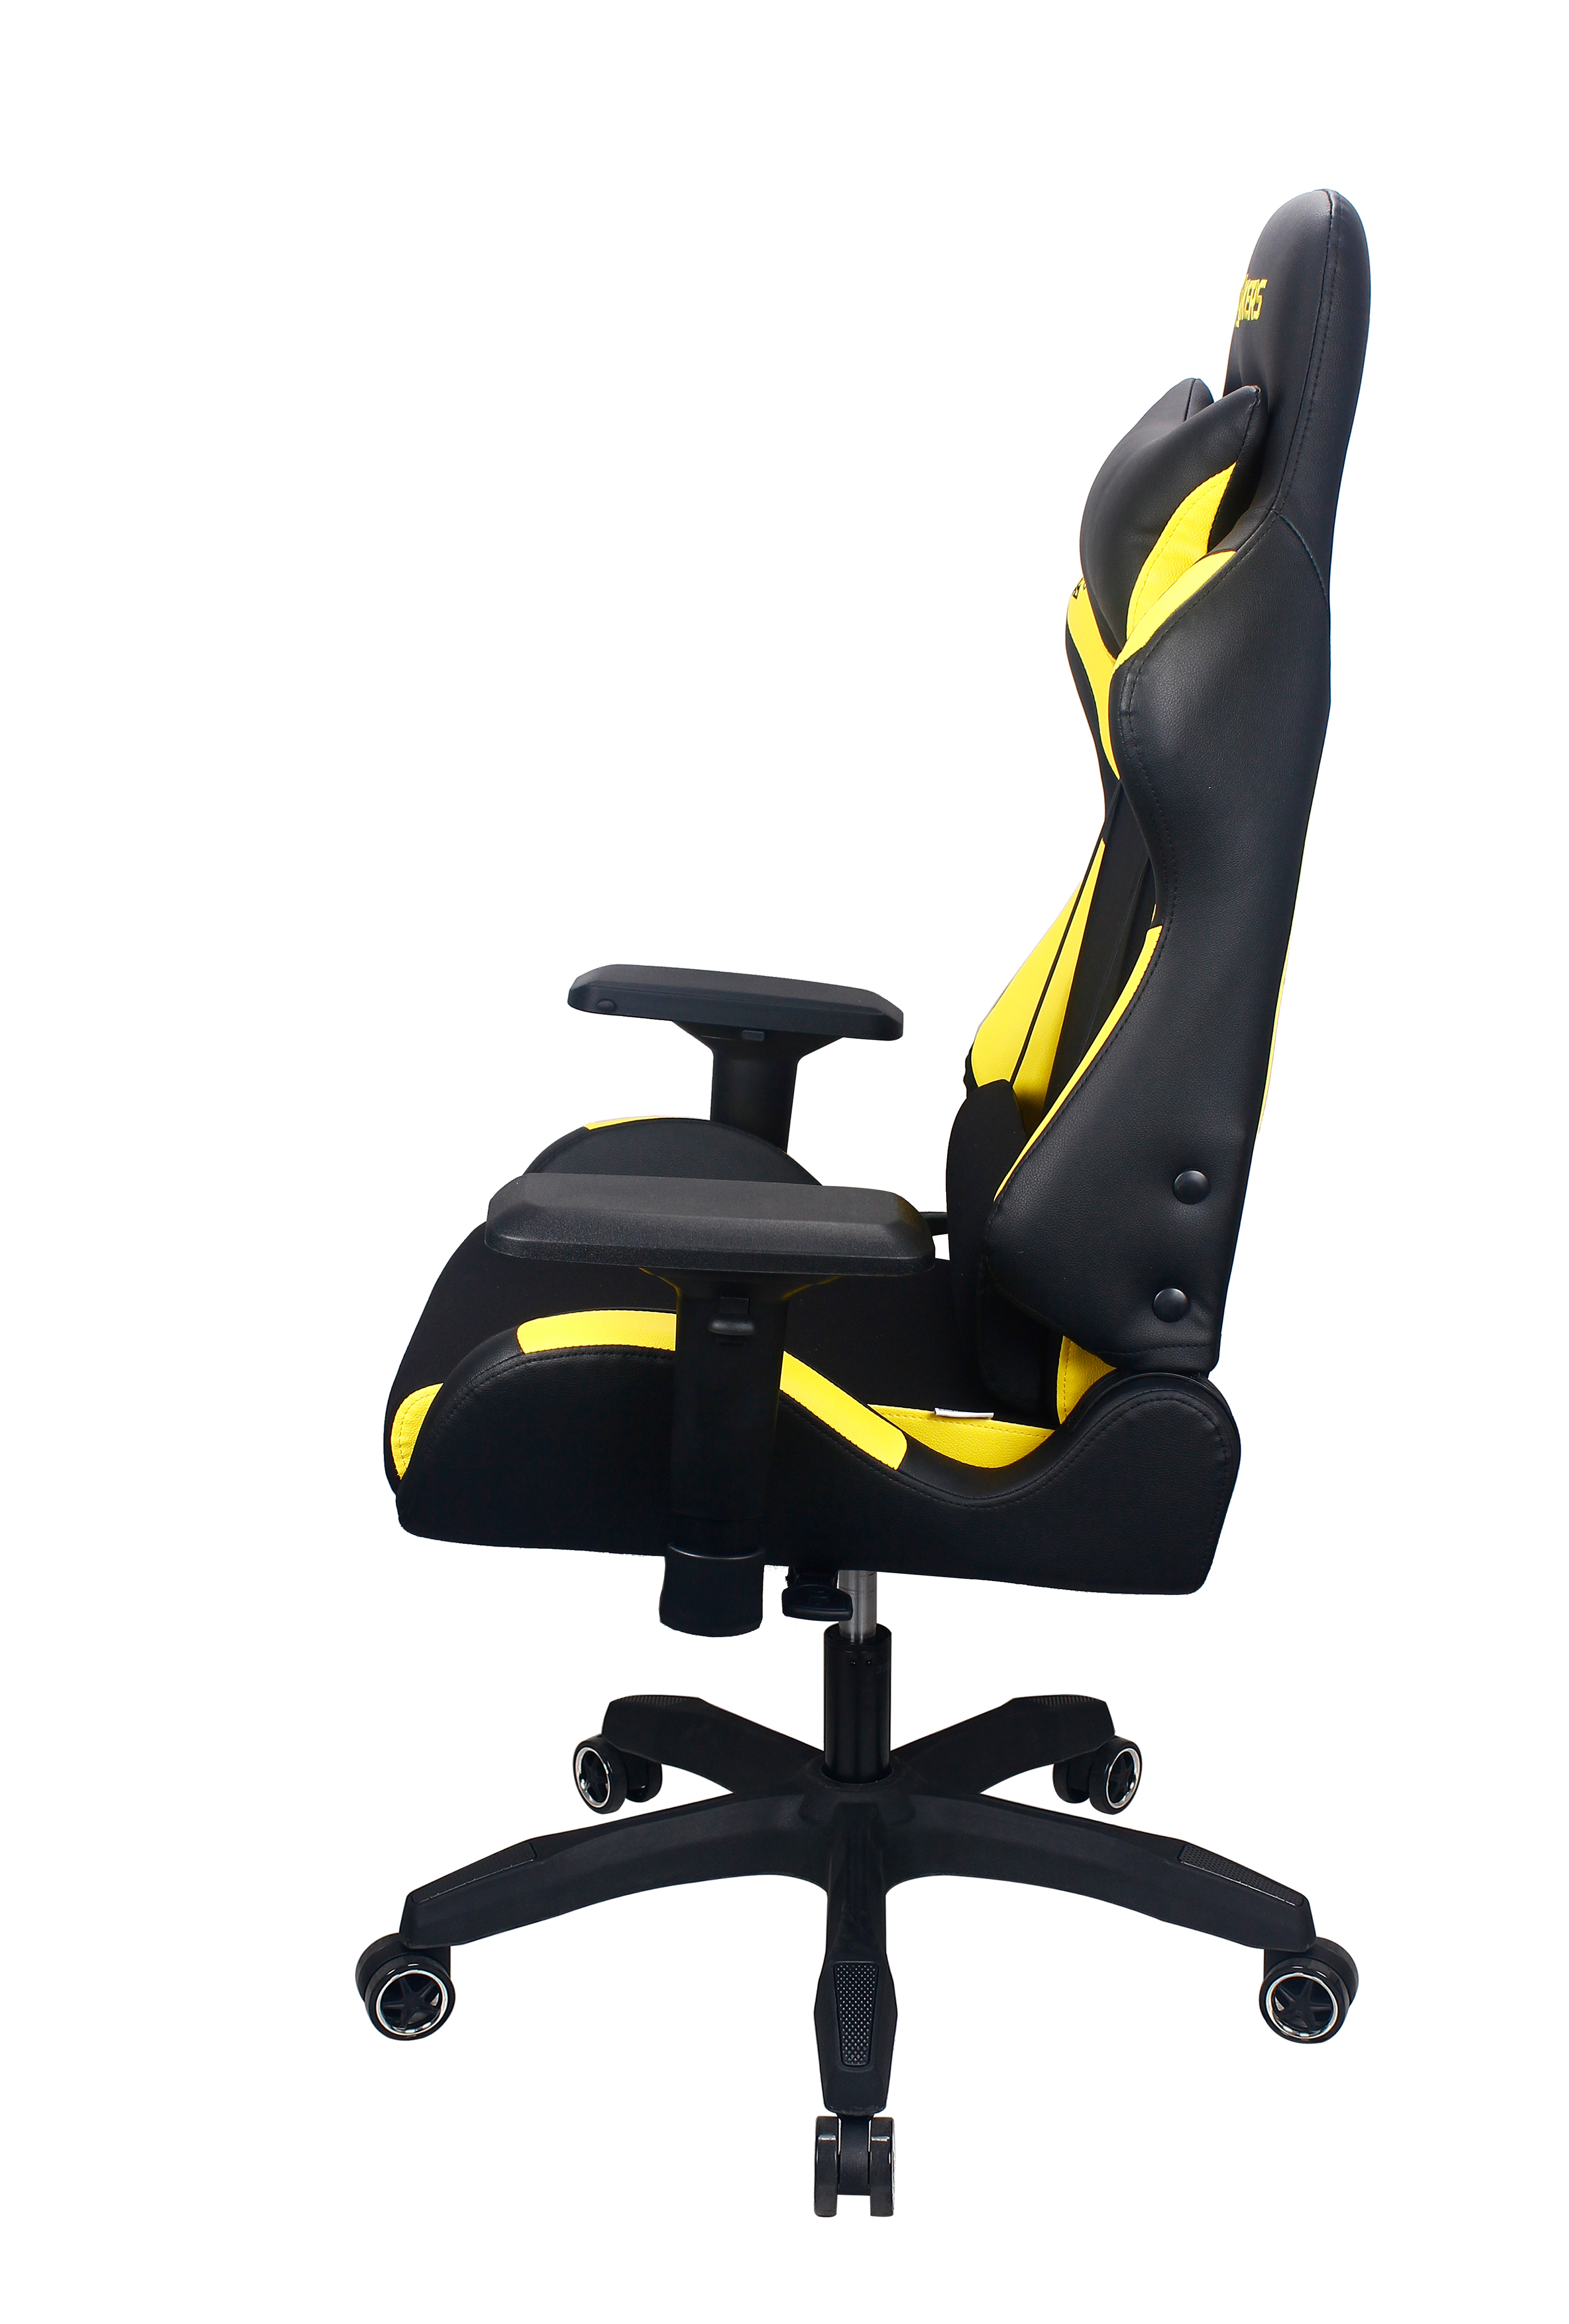 https://raynorgaming.com/wp-content/uploads/2019/07/LA-LAKER-gaming-chair59M48790-with-pillow-side-view2_20190528.jpg